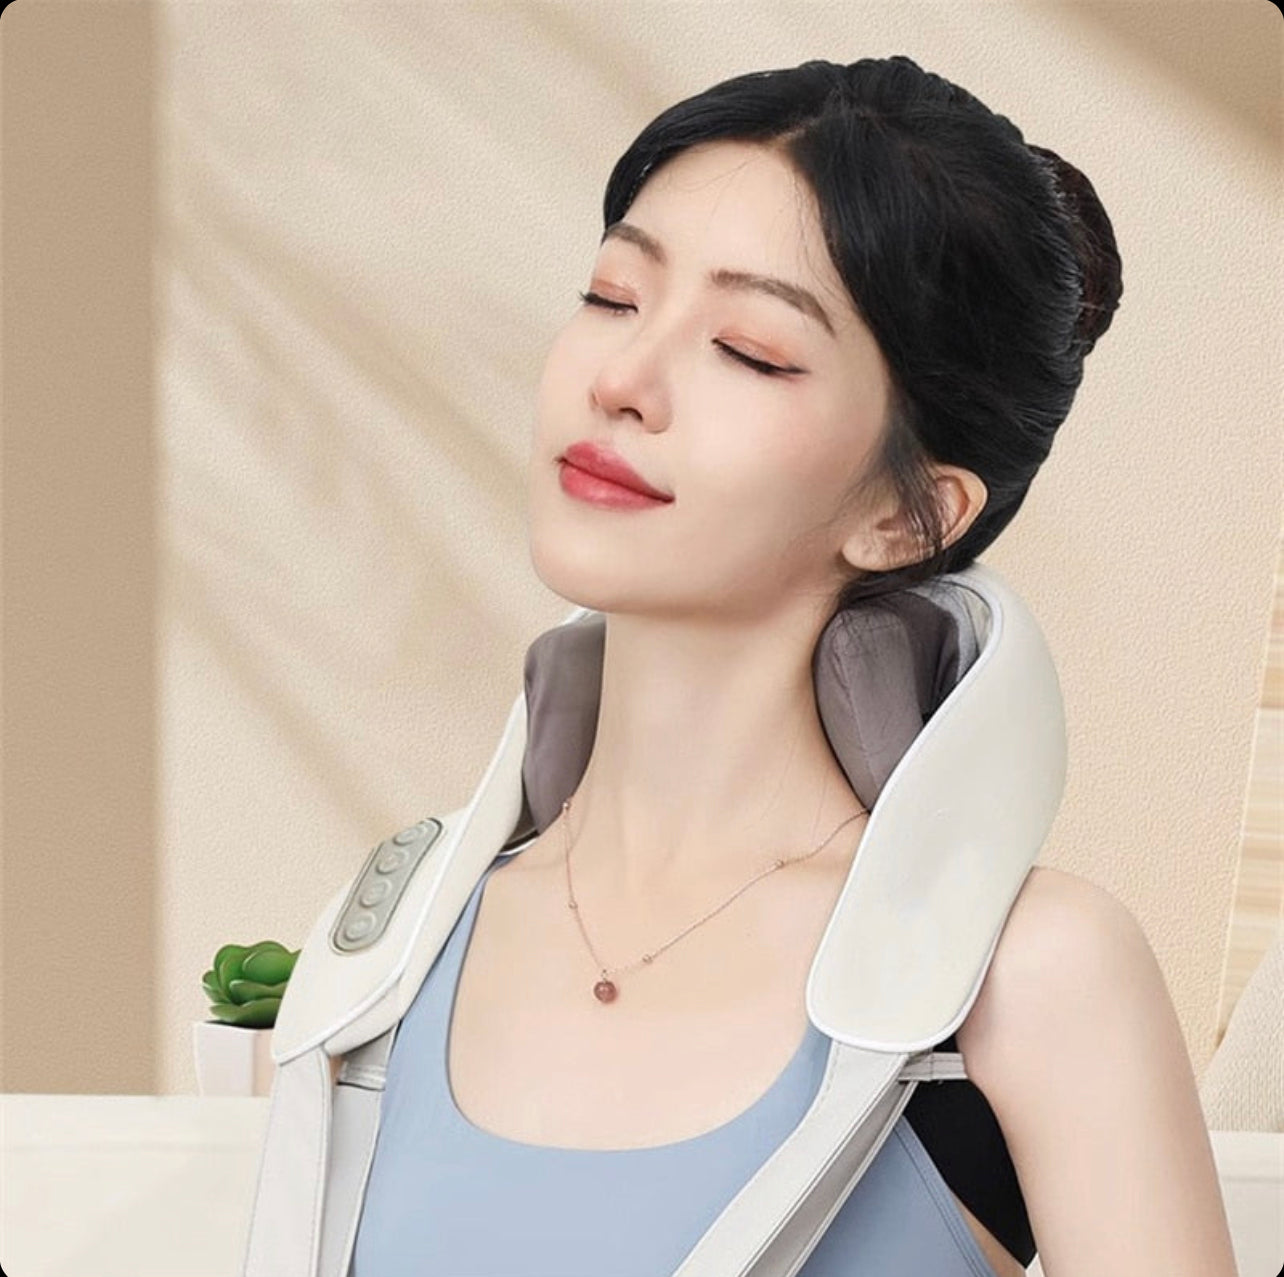 Stress Relieving And Soothing Neck And Shoulder Massager - [With